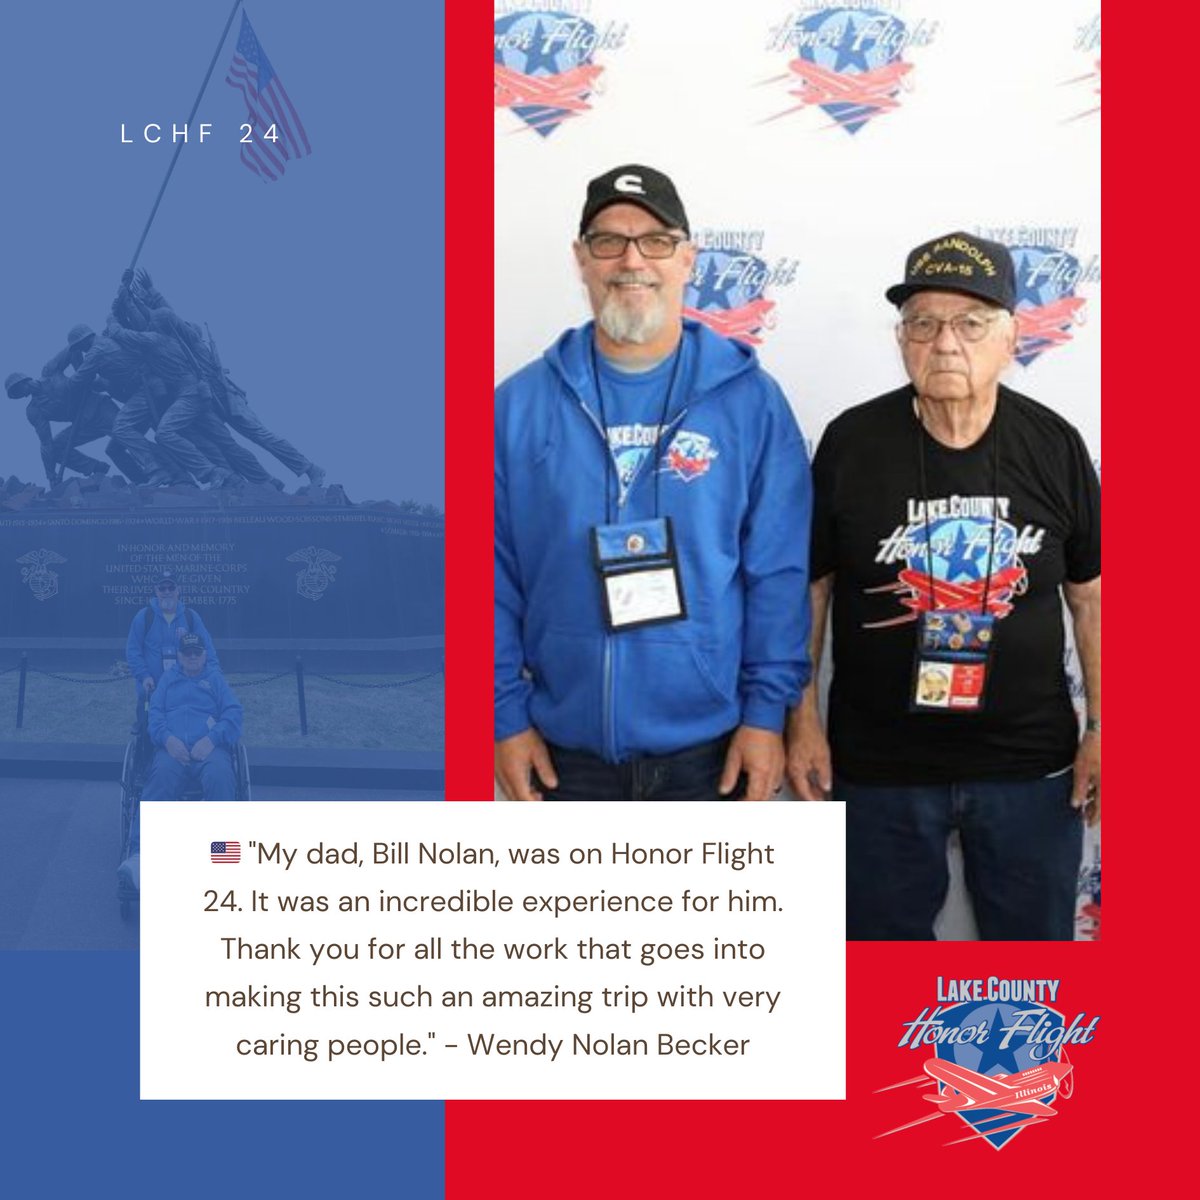 LCHF 24🇺🇸 'My dad, Bill Nolan, was on Honor Flight 24. It was an incredible experience for him. Thank you for all the work that goes into making this such an amazing trip with very caring people.' - Wendy Nolan Becker
#LakeCountyHonorFlight #lchf24 #honorflight